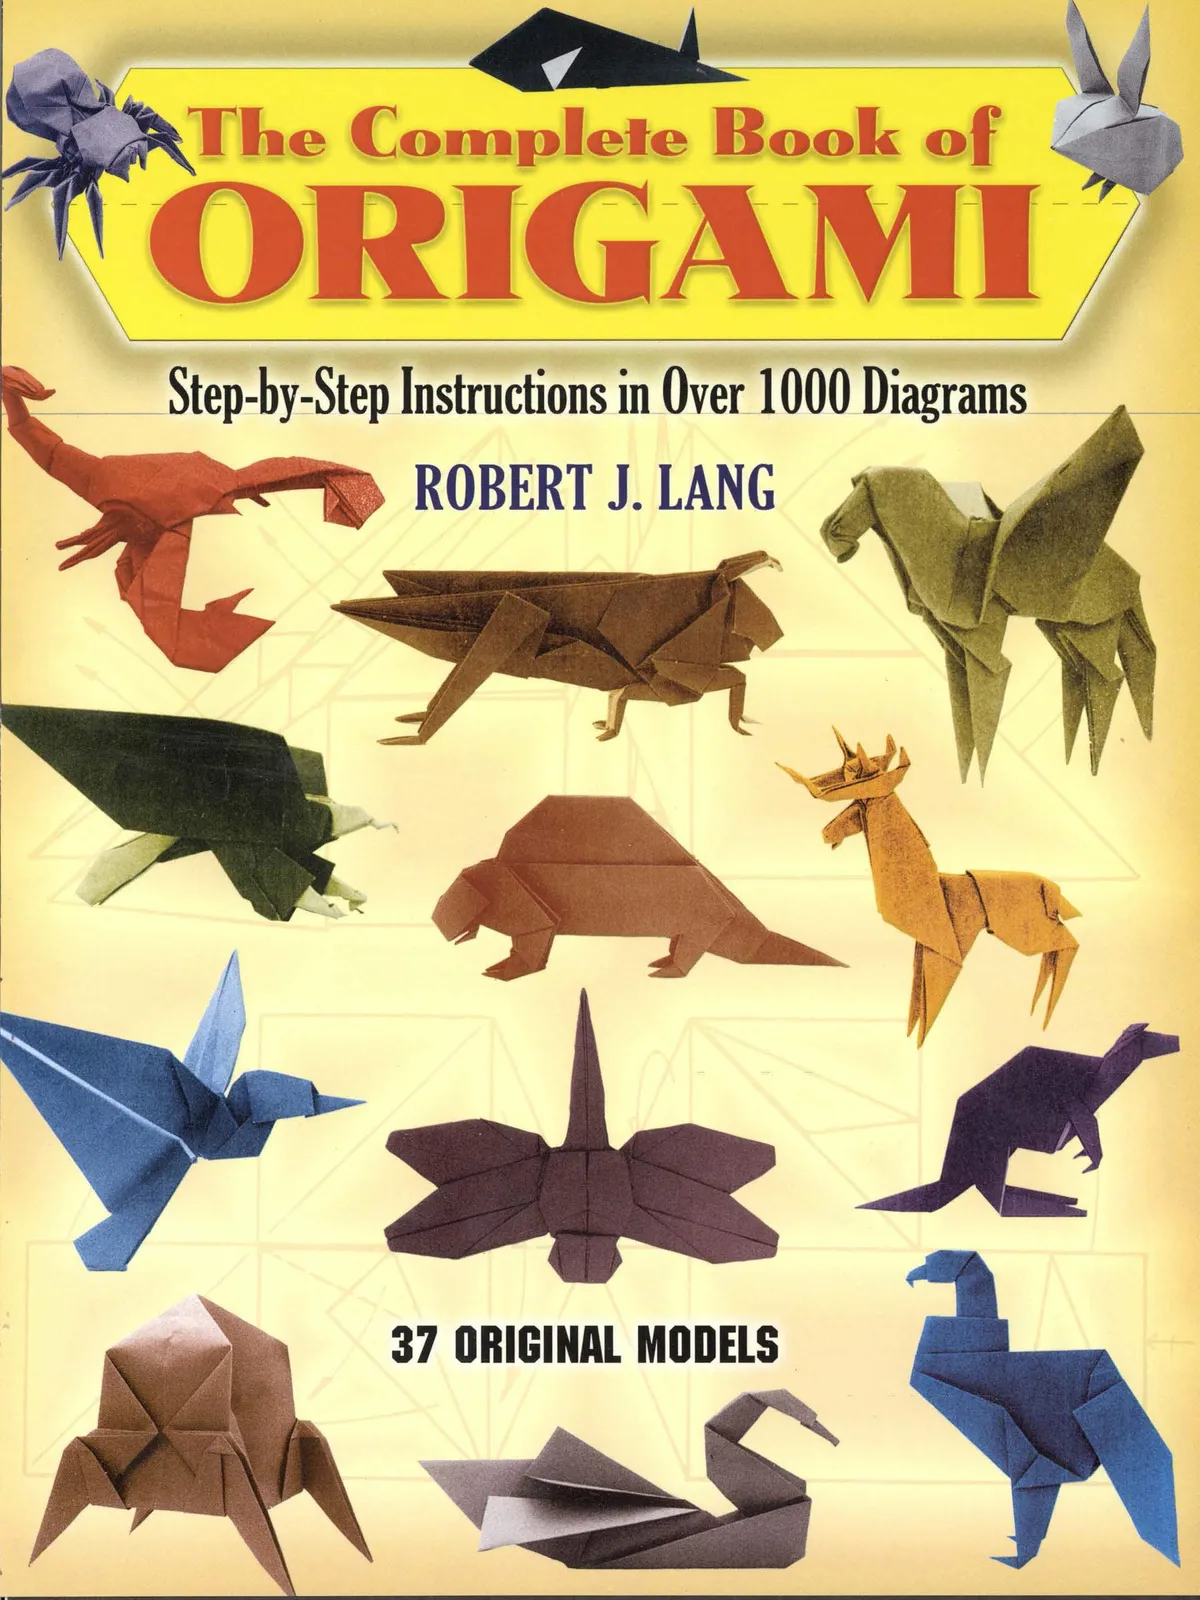 Origami Book for Kids: Big Origami Set Includes Origami Book and 100  High-Quality Origami Paper, Fun Origami Book with Instructions - 30 Step by  Step Projects about Animals, Plants and More! 